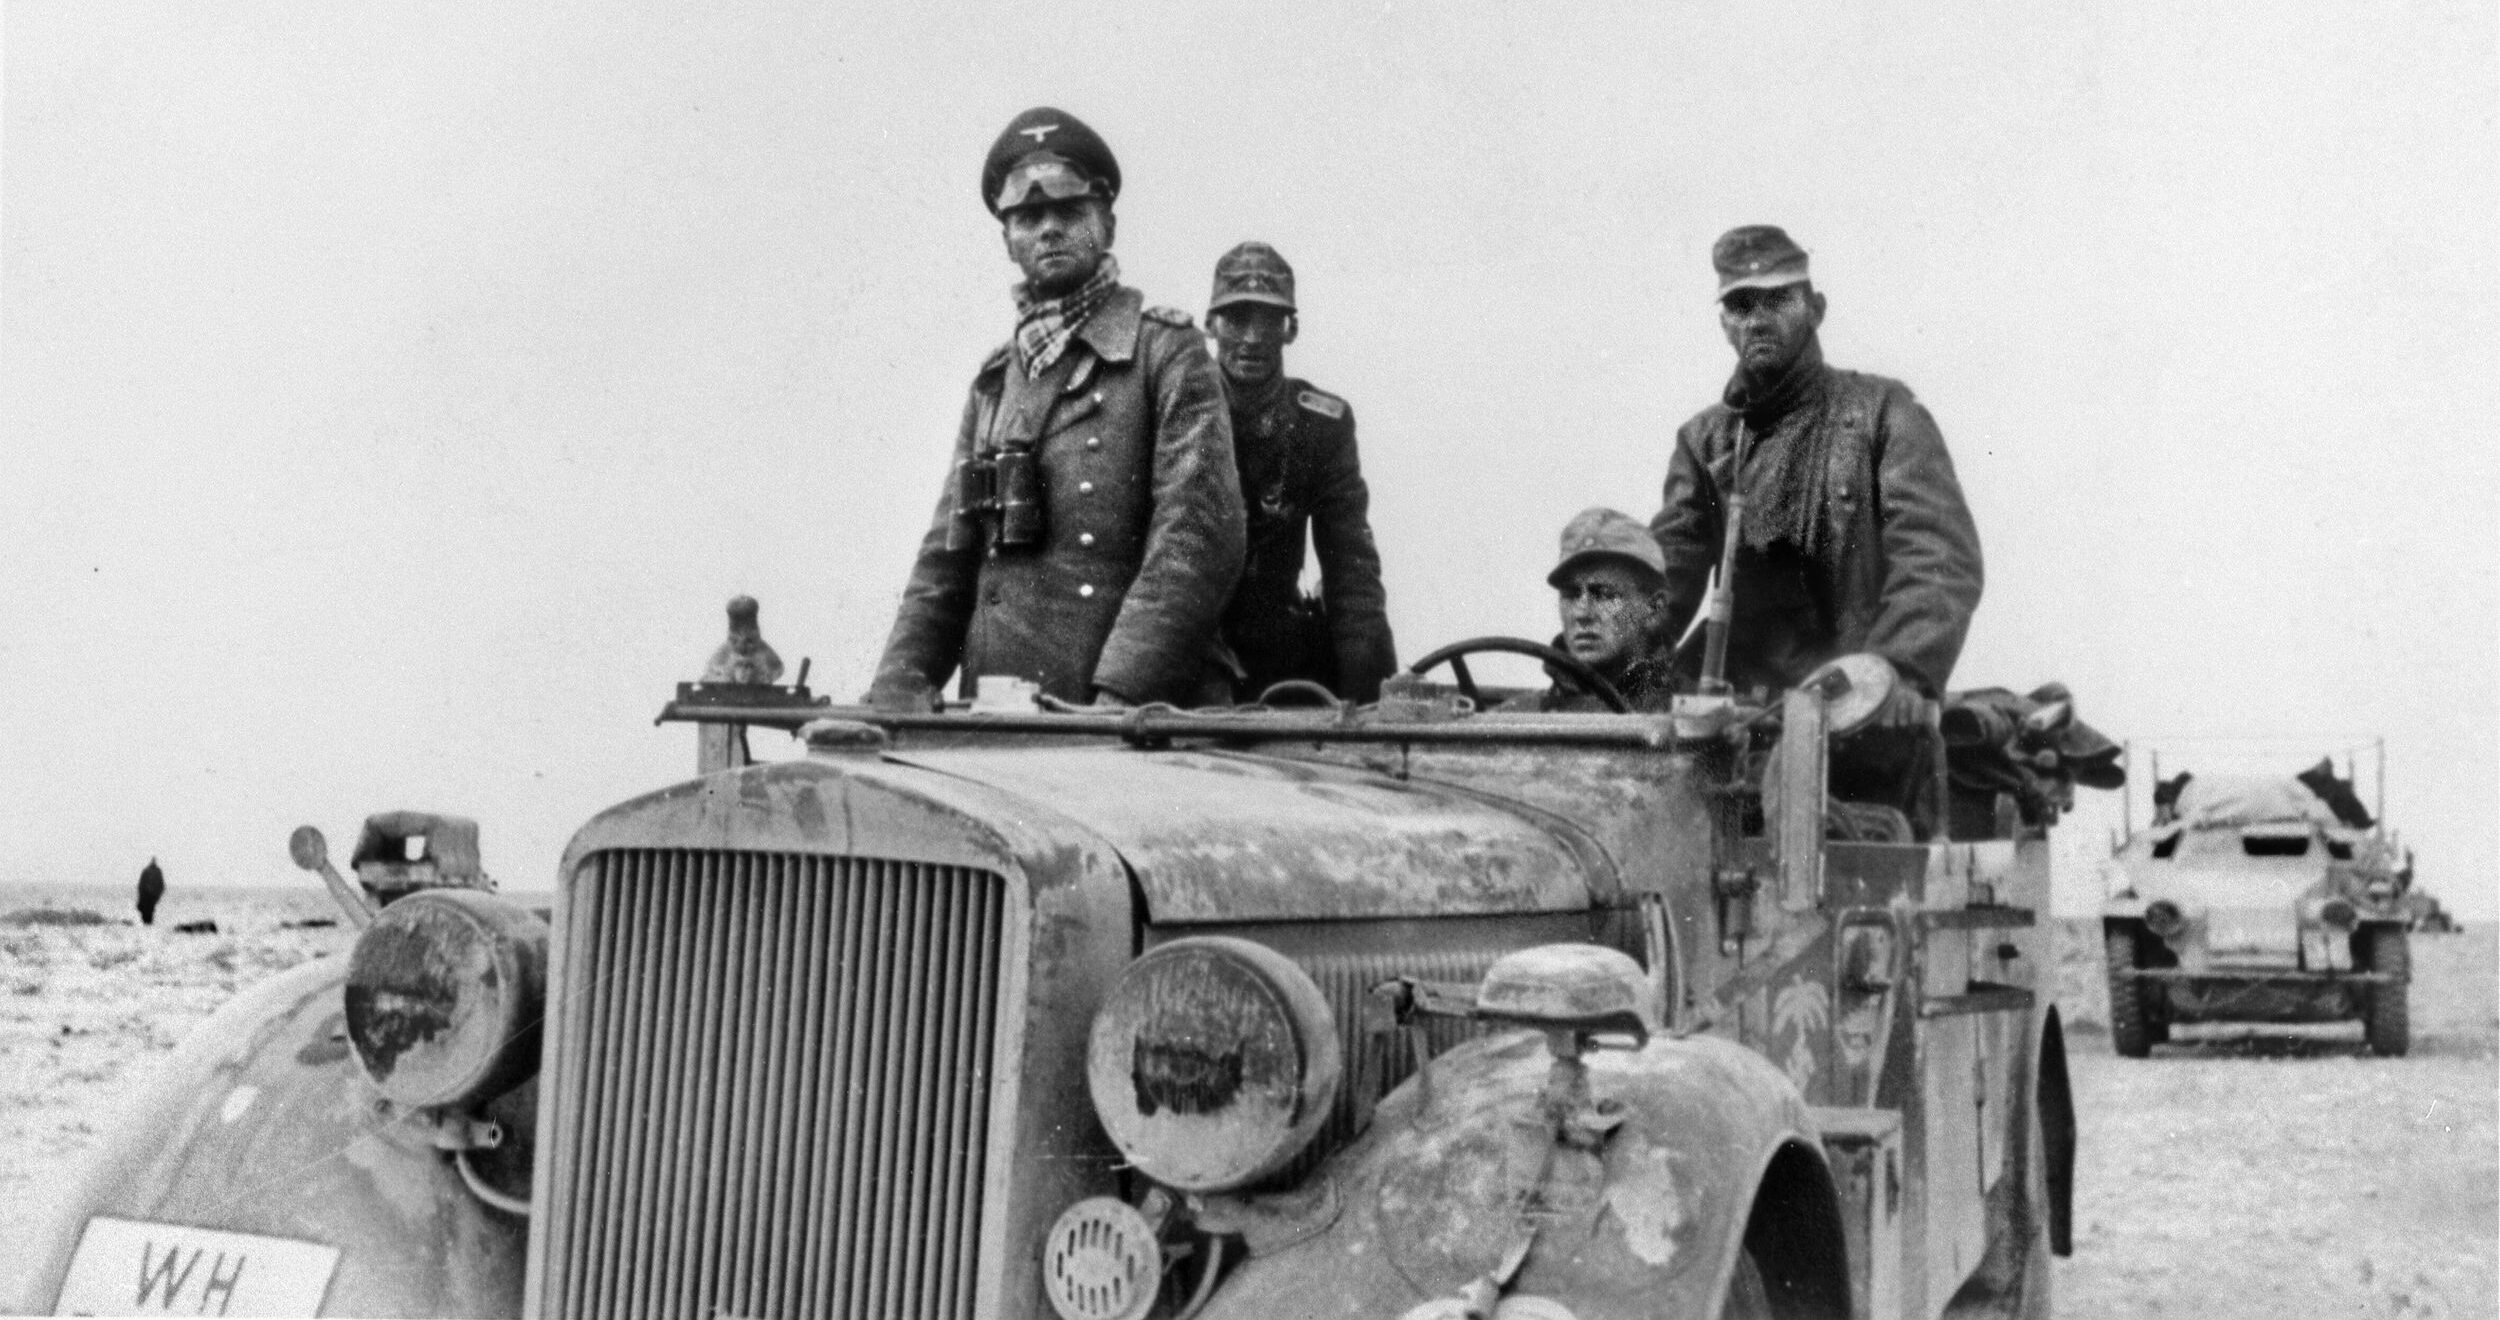 Lieutenant General Erwin Rommel in his staff car in North Africa in 1941. Arriving in Tripoli in February 1941, he was quickly on the advance, forcing British troops to retreat back into Eqypt.